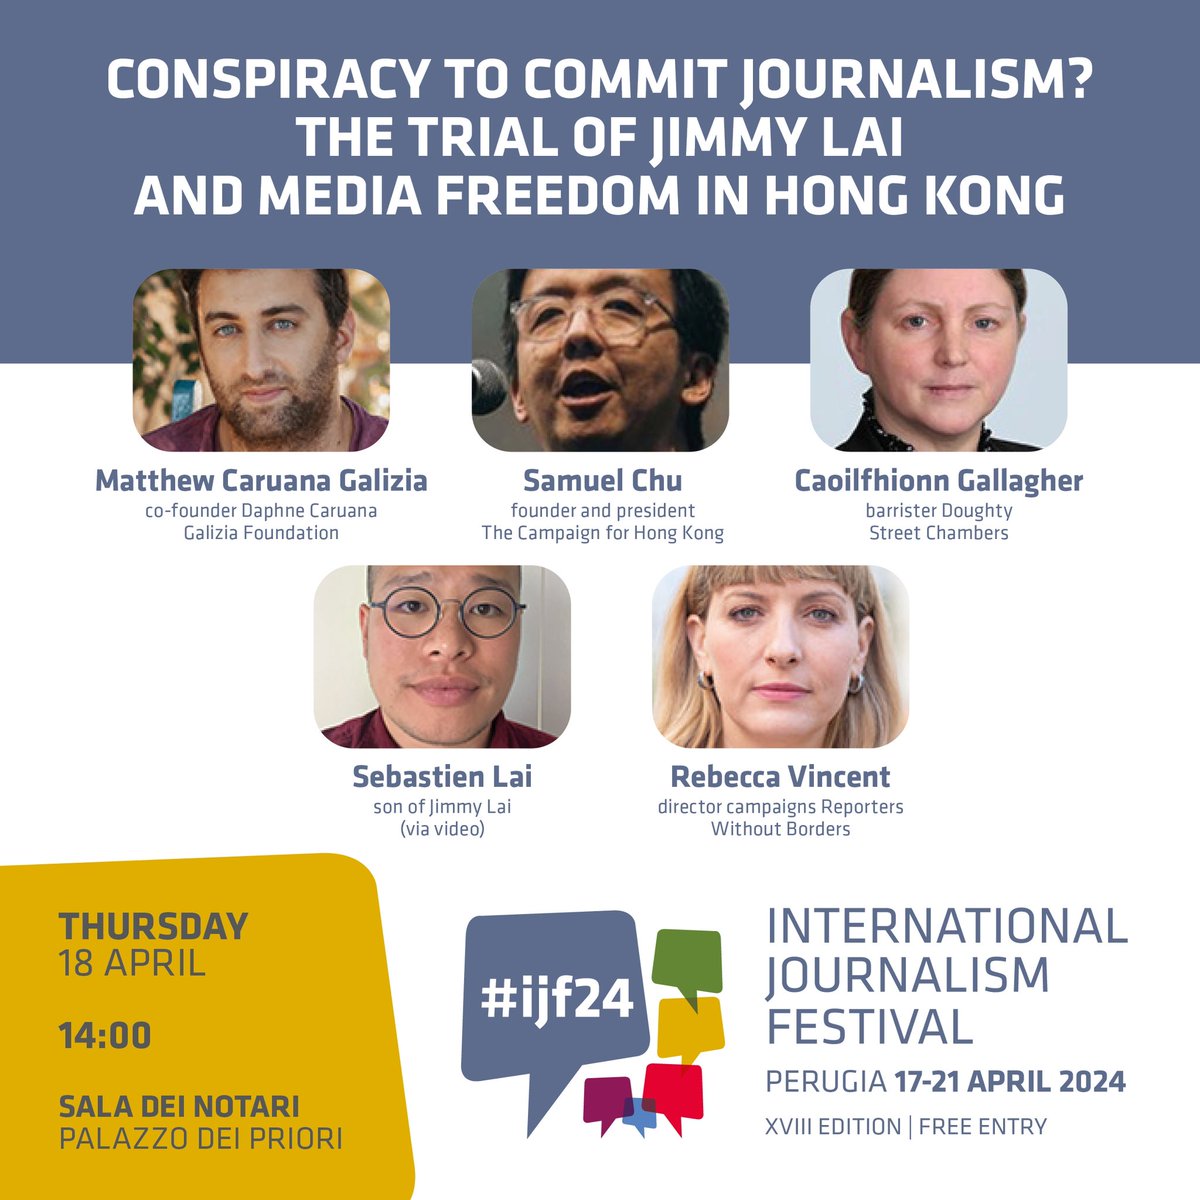 This week @journalismfest #ijf24, in #Perugia 🇮🇹 & online: Conspiracy to Commit Journalism: The Trial of #JimmyLai & Media Freedom in #HongKong 🗞️Thurs 18 April, 1400 CET 🗞️Sala dei Notari 🗞️@rebecca_vincent 🗞️Sebastien Lai 🗞️@samuelmchu 🗞️@mcaruanagalizia 🗞️@caoilfhionnanna